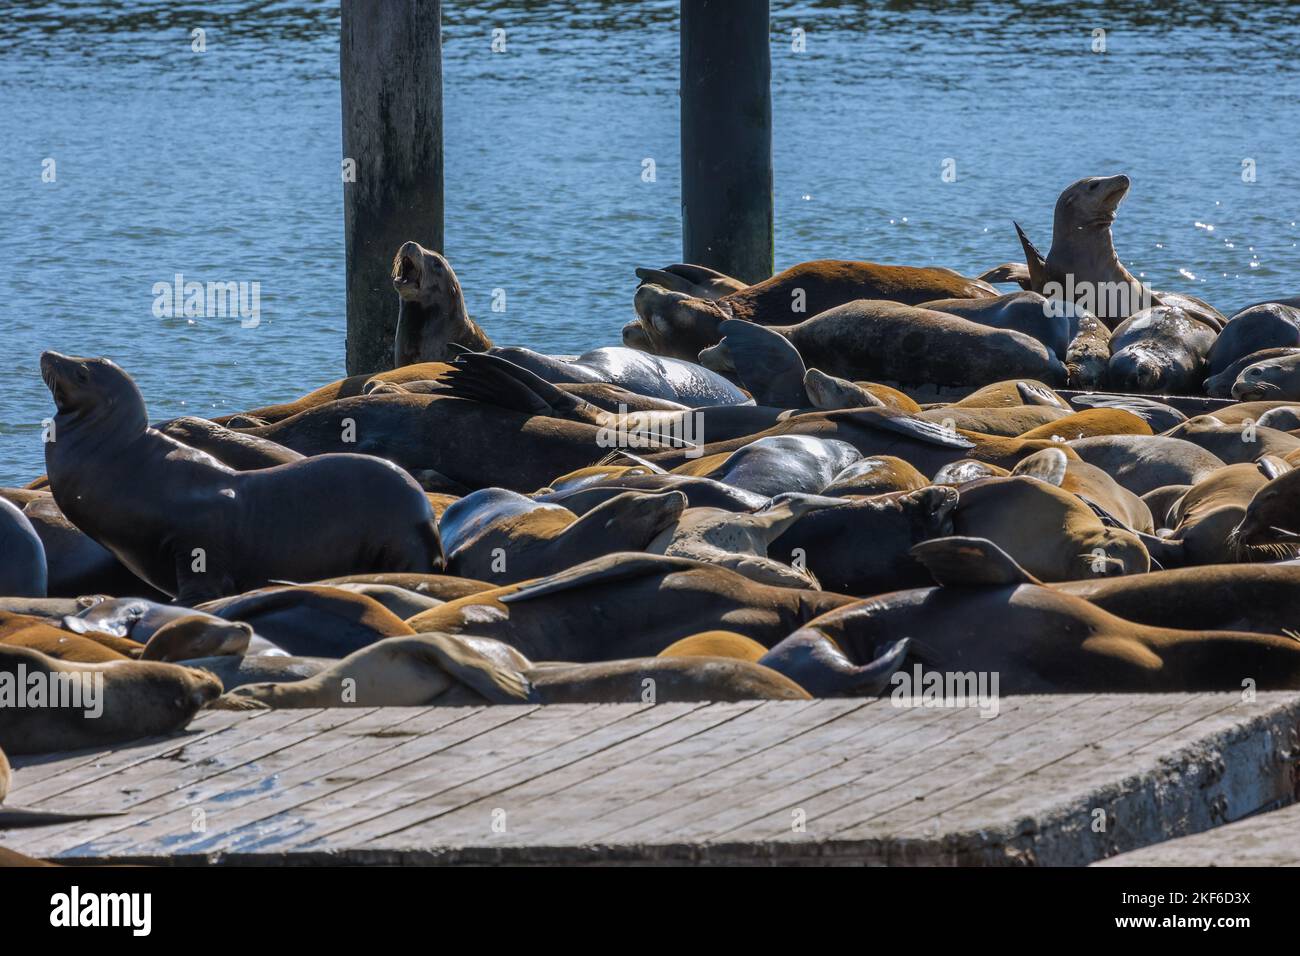 The famous sea lions on San Francisco's wooden floating docks at pier 39 of  Fishermans wharf Stock Photo - Alamy